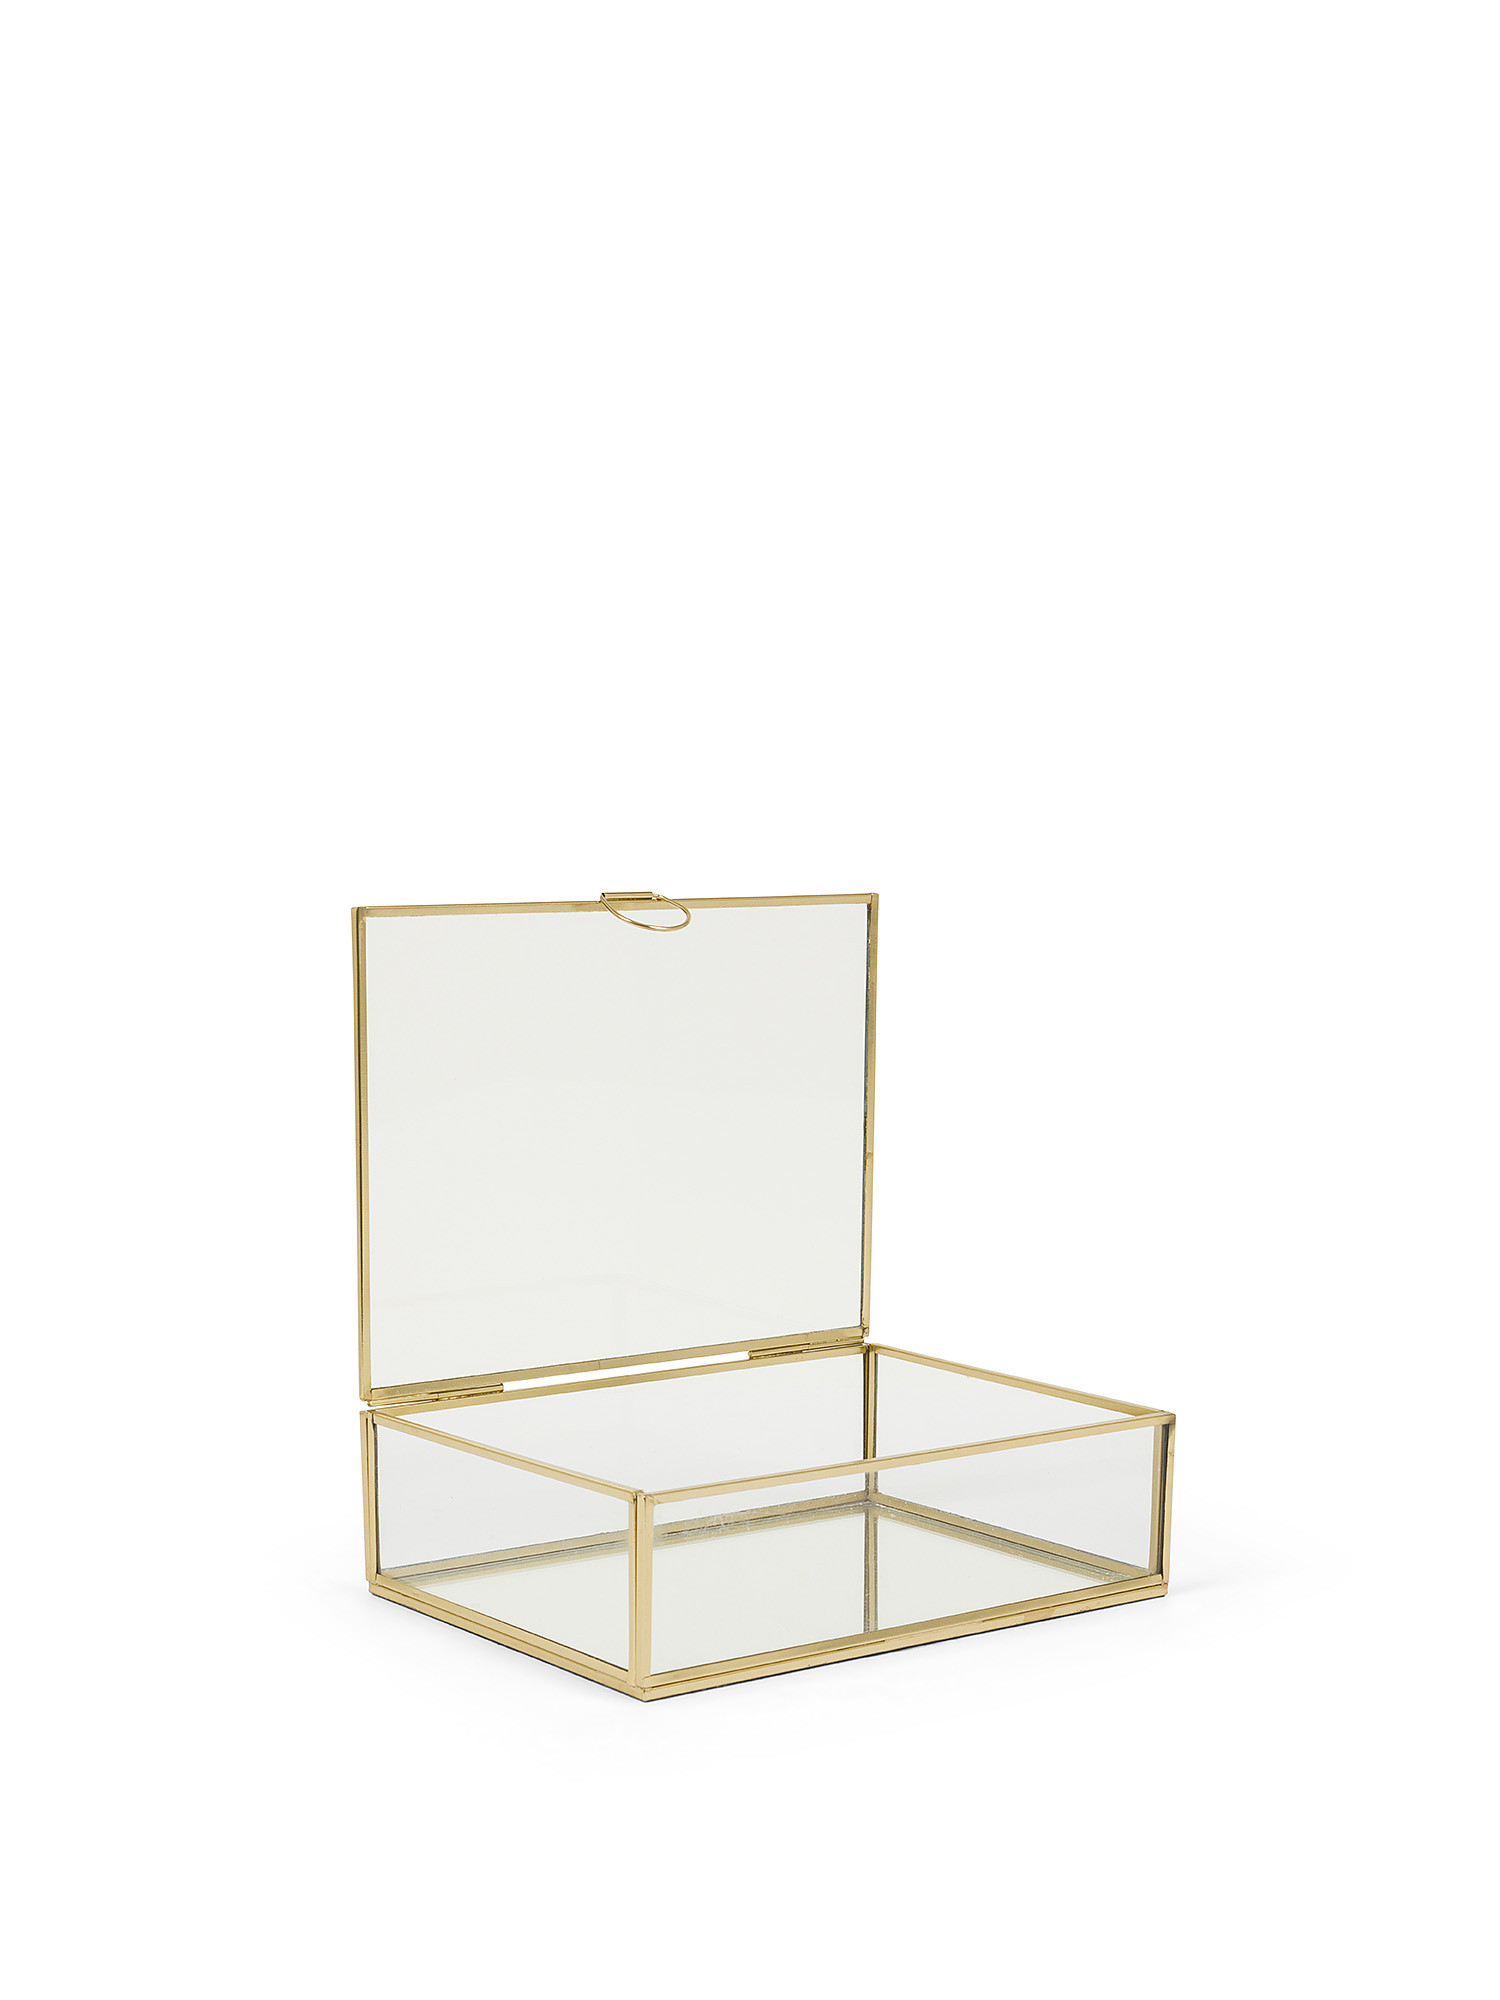 Glass jewelery box with golden edges, Transparent, large image number 1